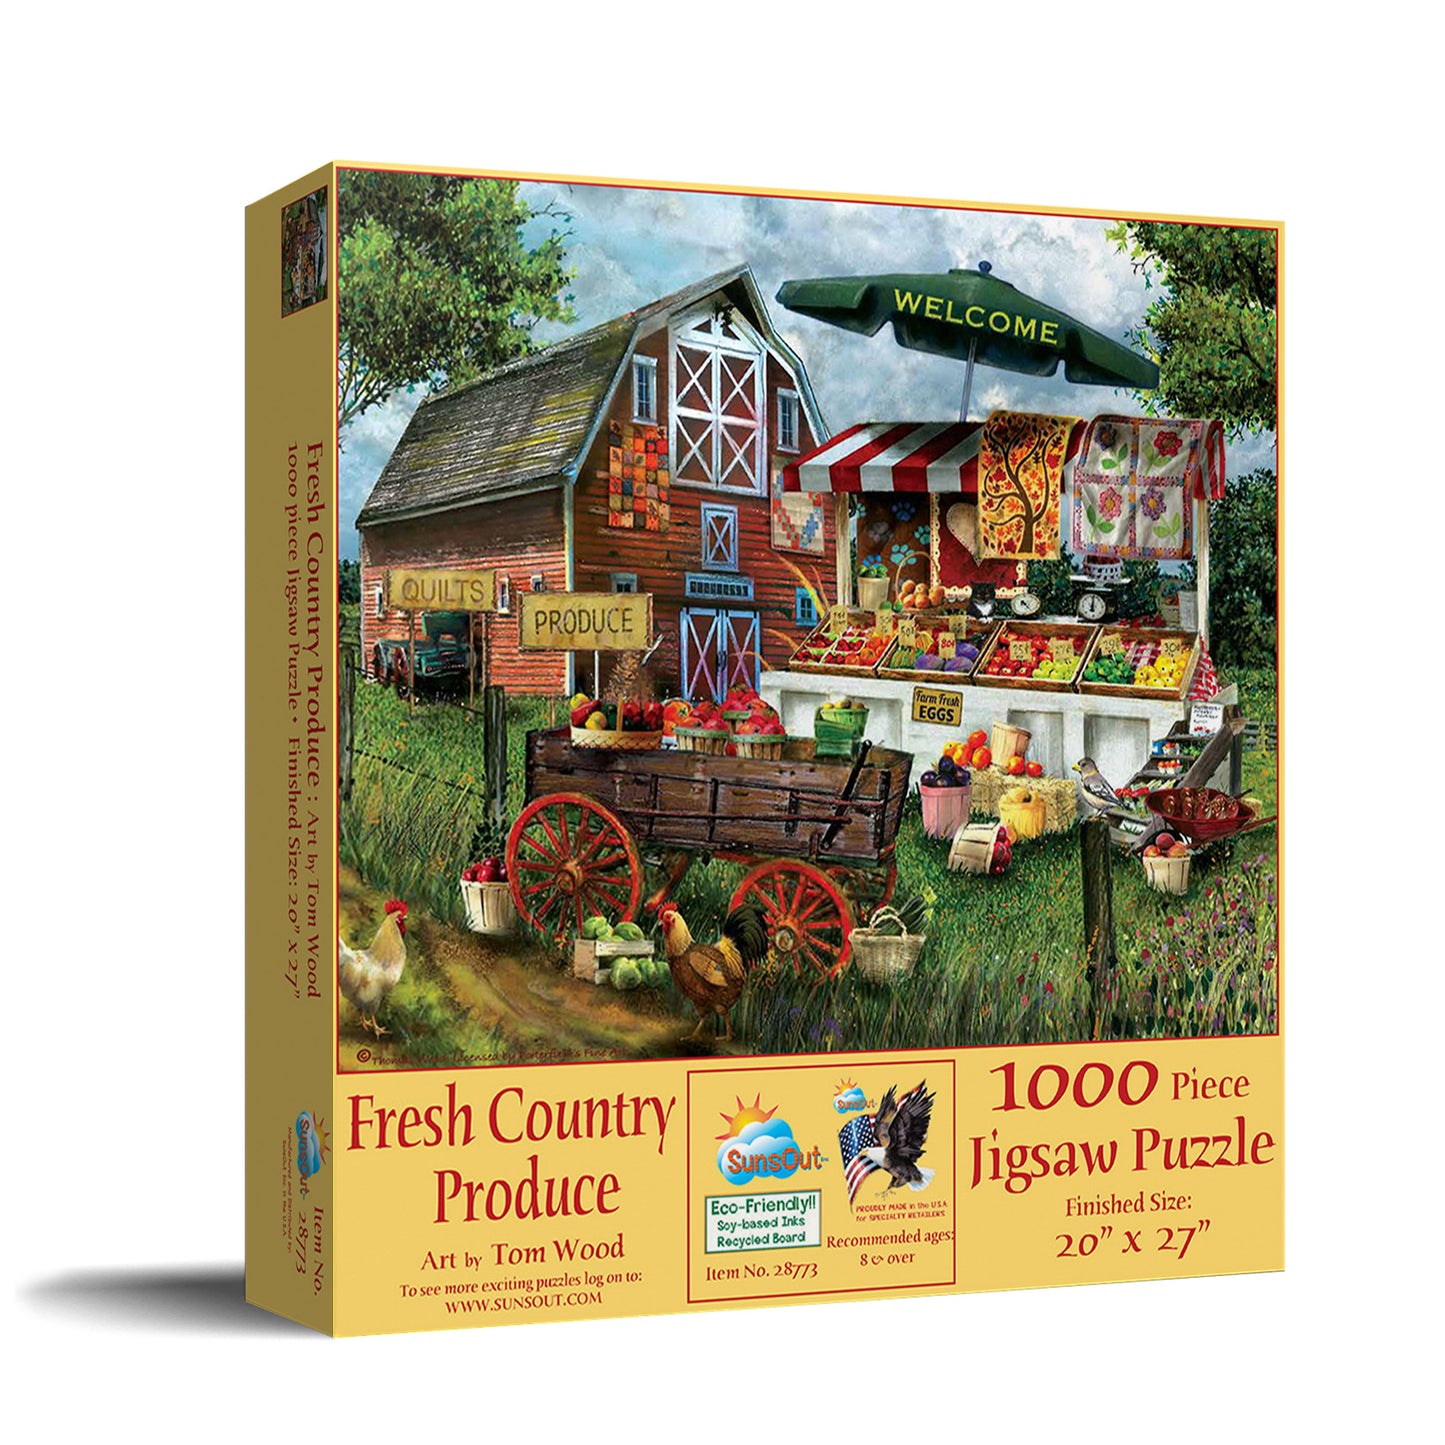 Fresh Country Produce - 1000 Piece Jigsaw Puzzle